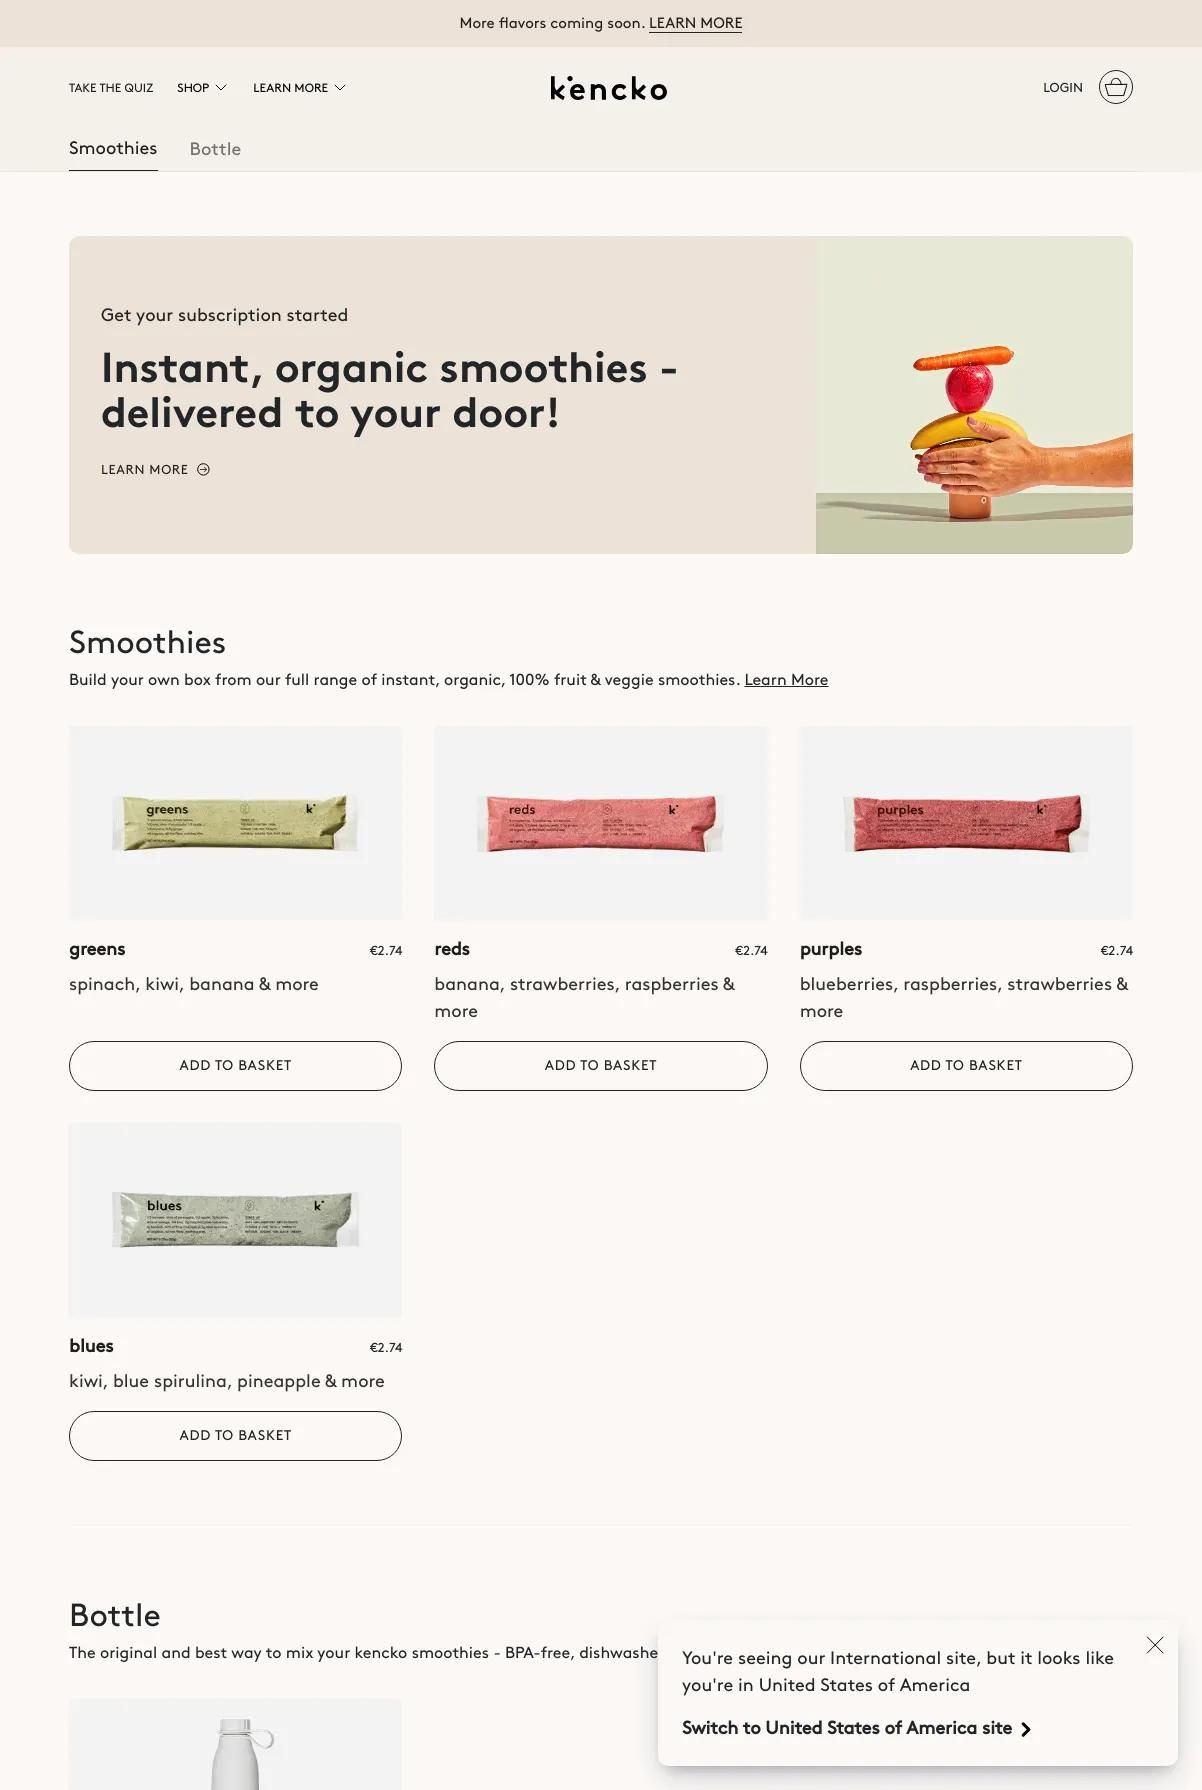 Screenshot 2 of Kencko (Example Shopify Food and Beverage Website)